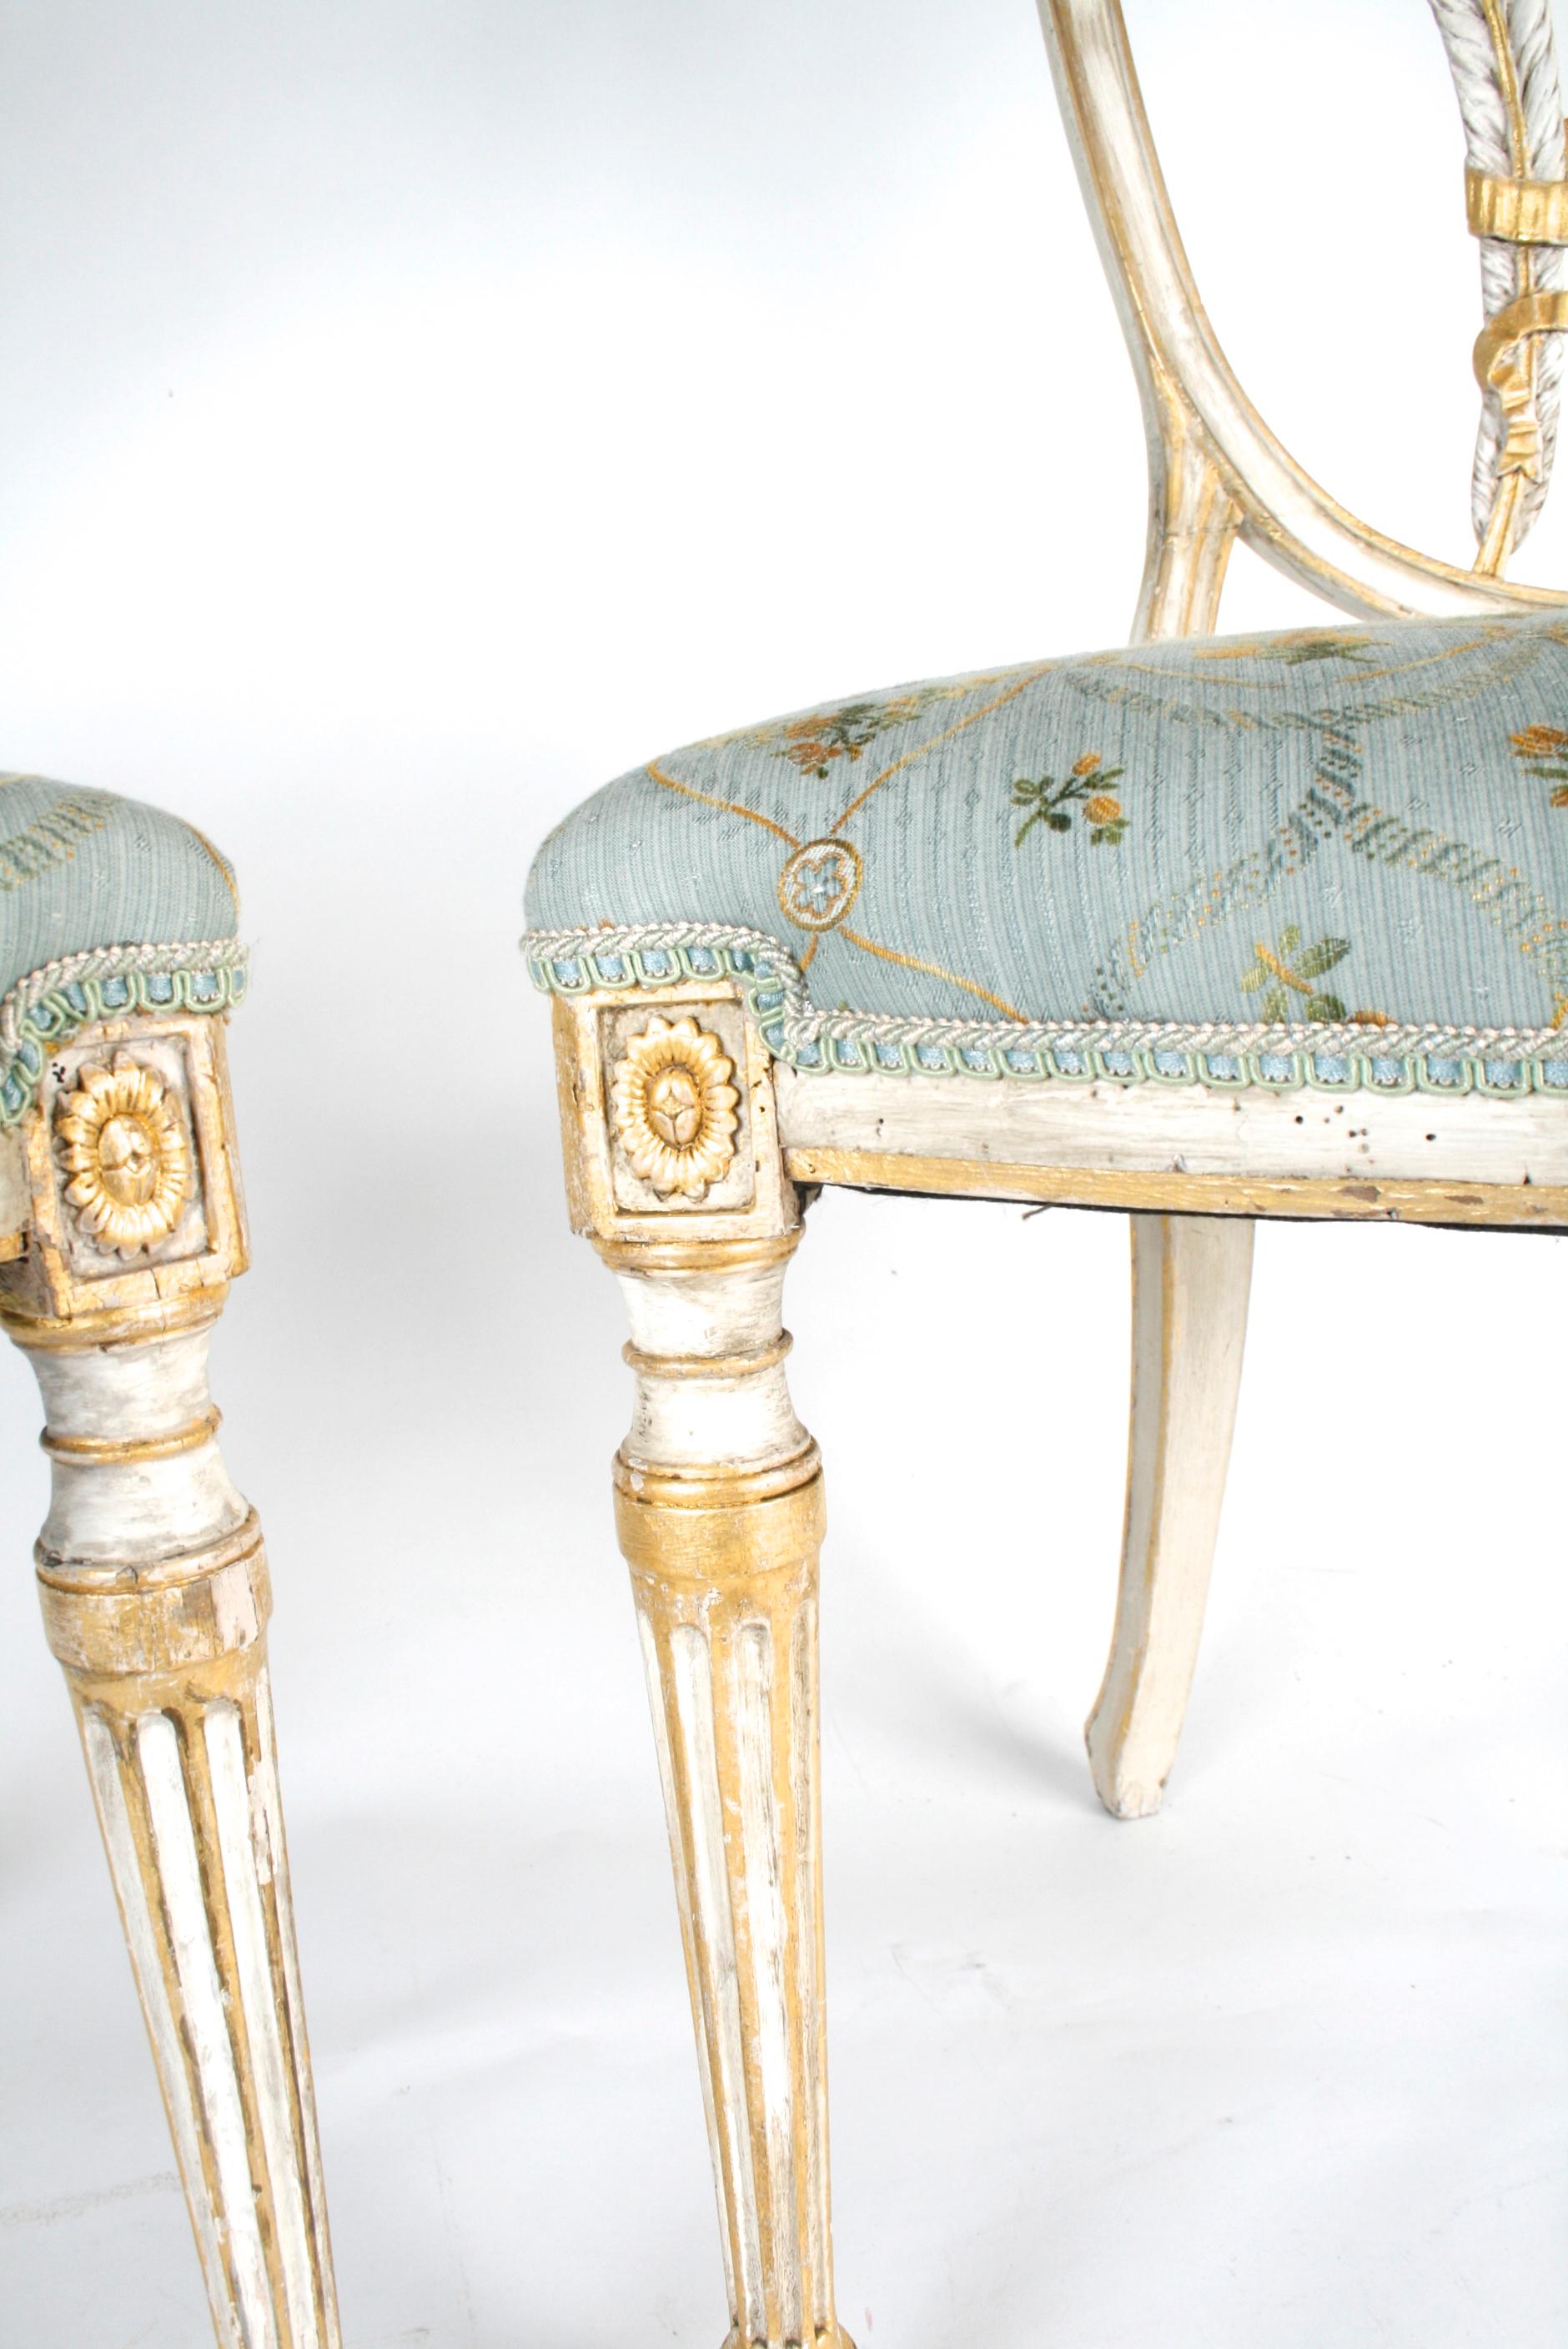 A pair of George III parcel-gilt and painted side chairs with curved shield backs inset with the Prince of Wales feather plumes. The chairs have upholstered serpentine seats that stand on turned and fluted front legs with rosettes. Their seat height